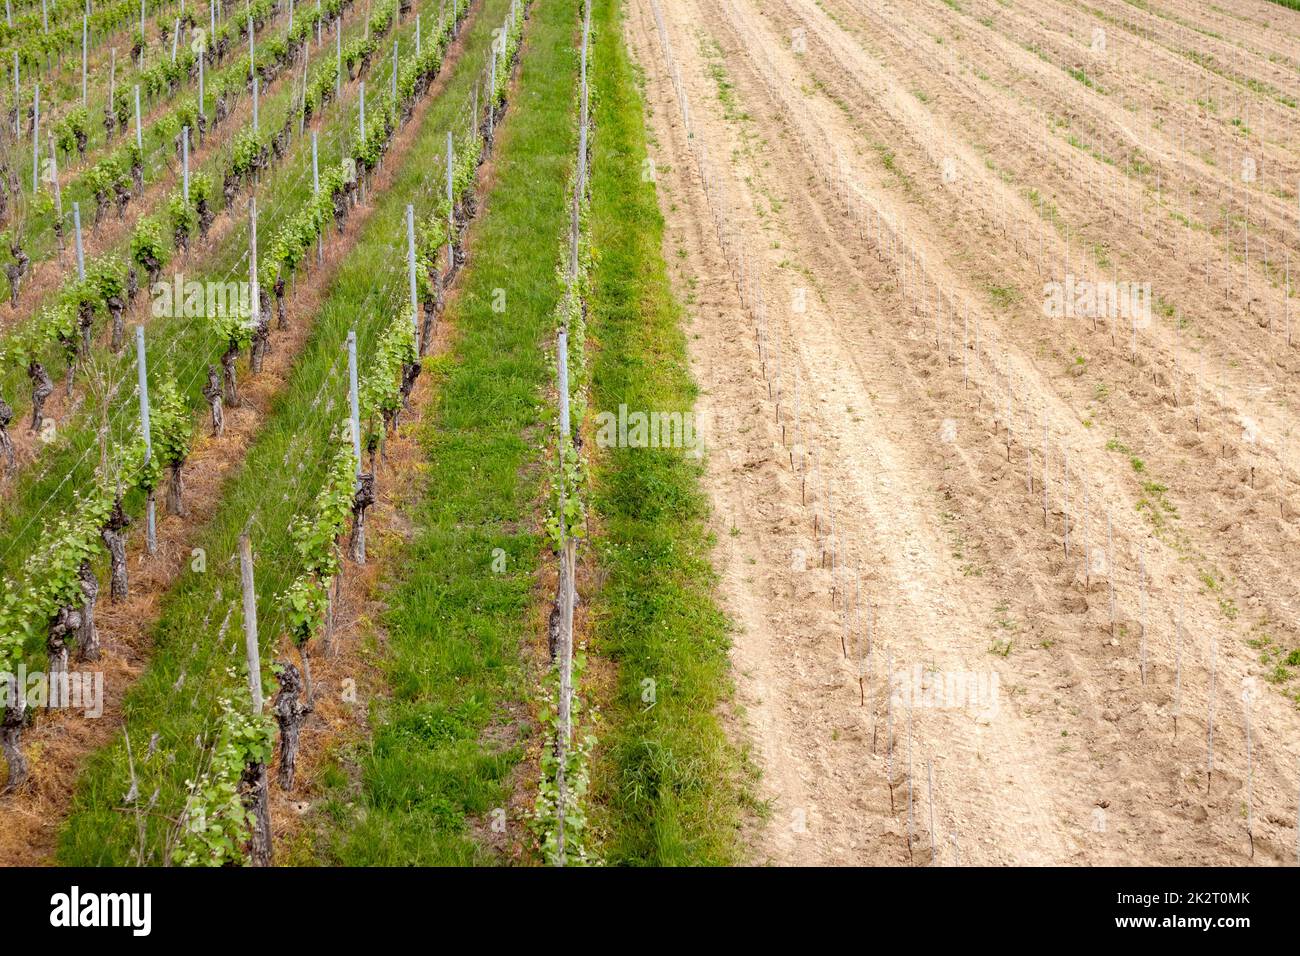 viticulture, vines planted and lie fallow Stock Photo